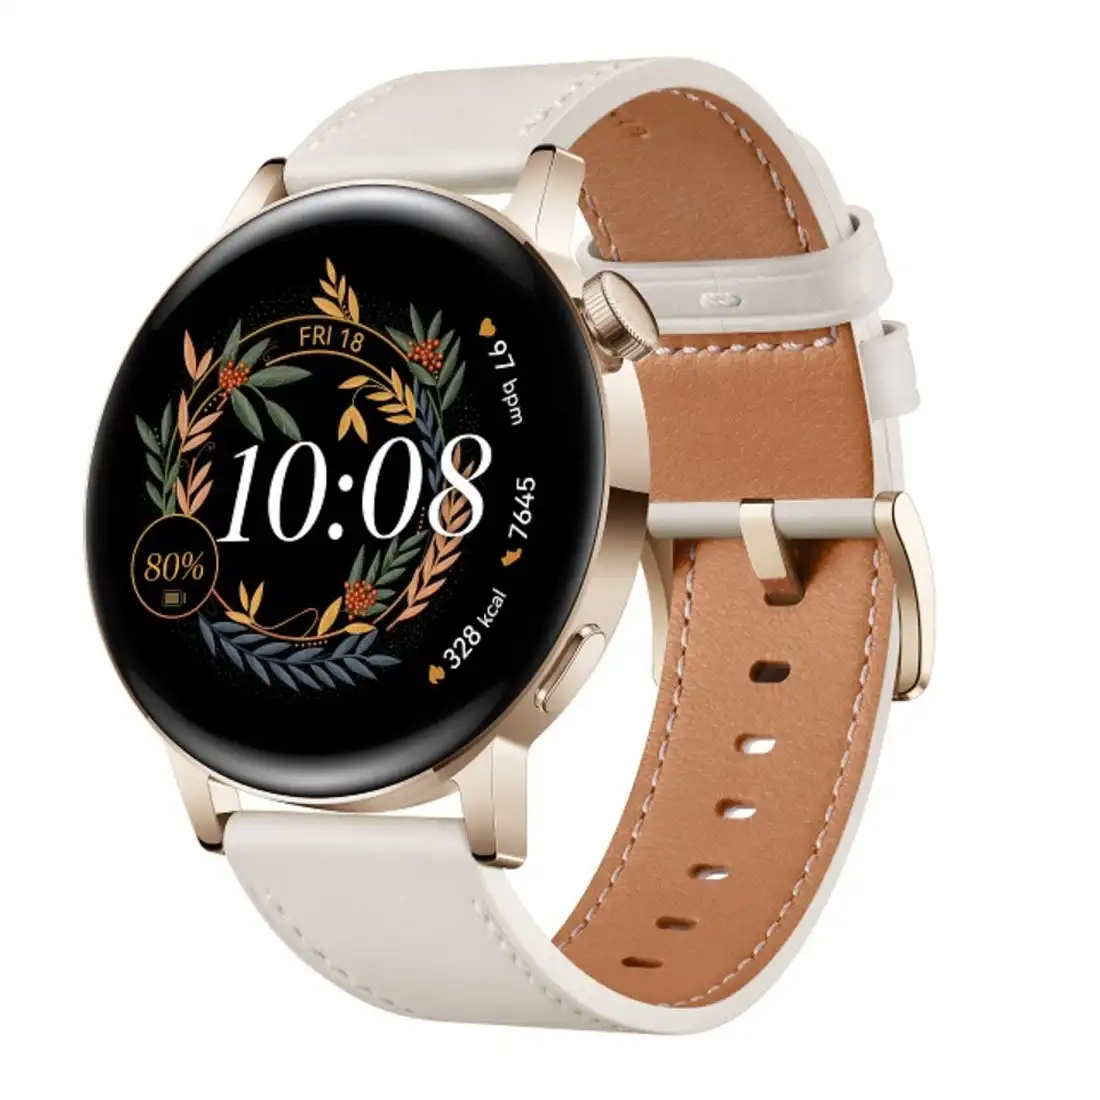 Huawei WATCH GT 3 Elegant with Leather Strap 42mm Smart Watch Milo-B19V - White